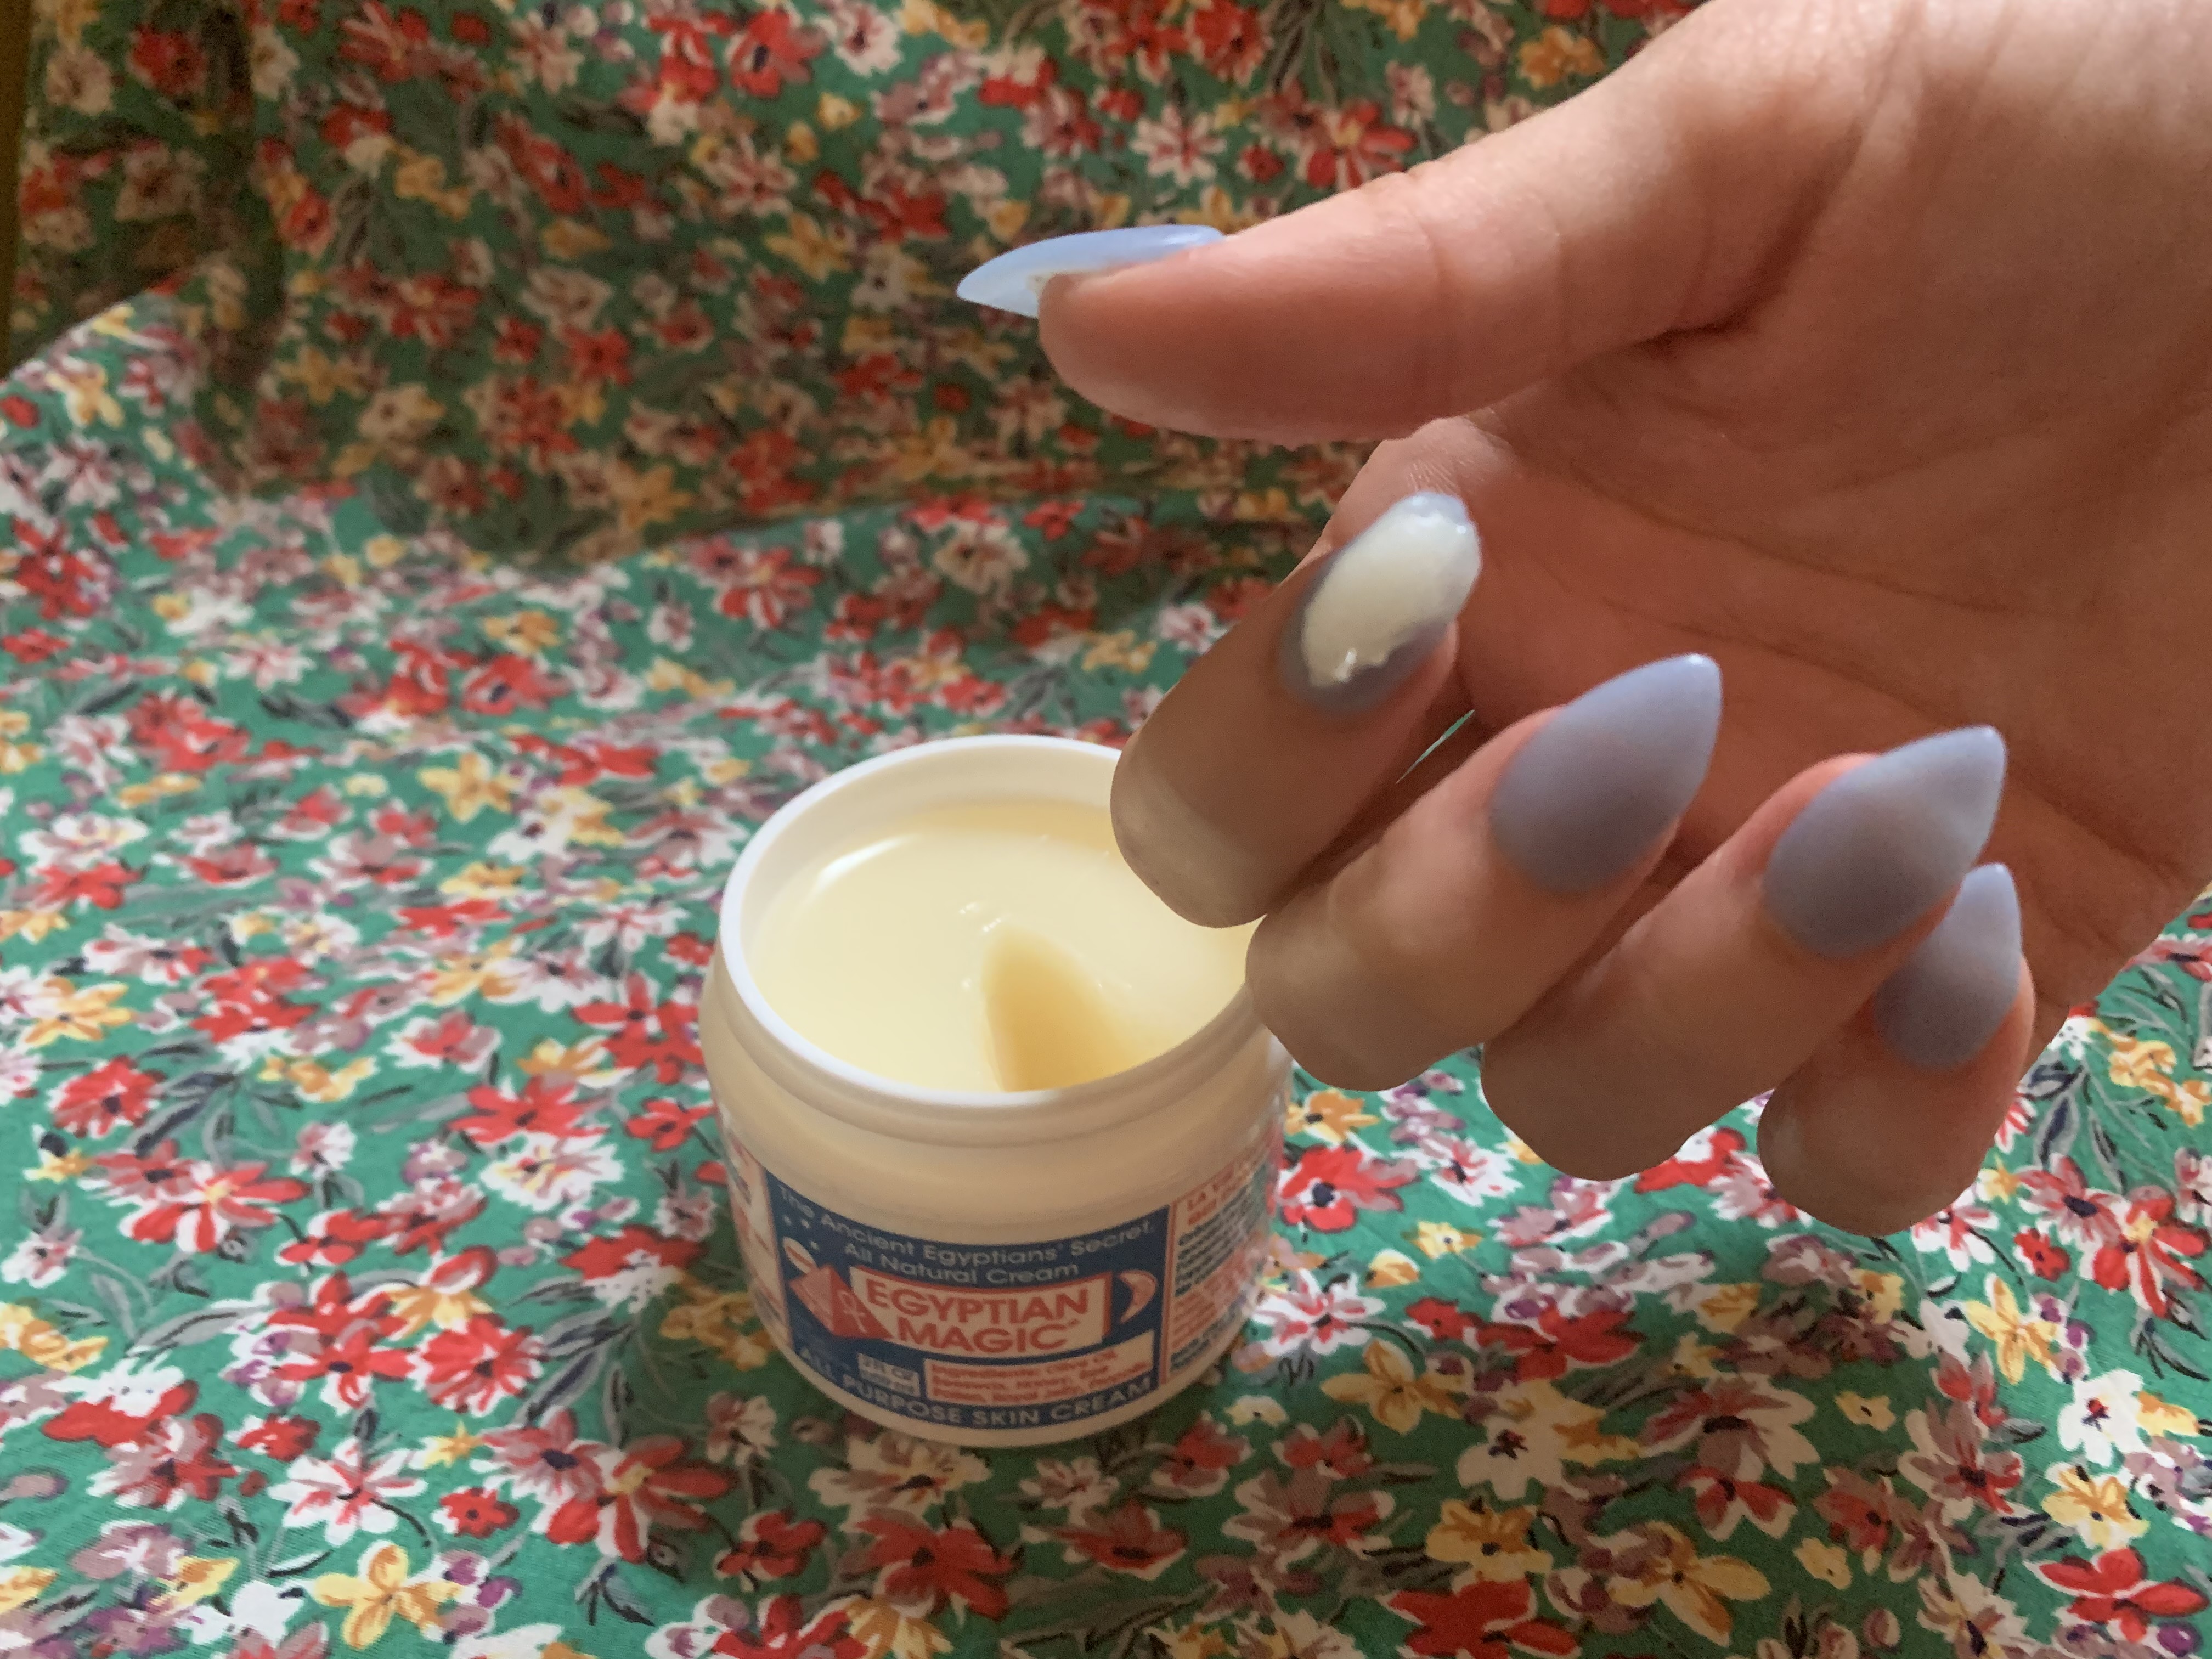 Photo of open jar of Egyptian Magic cream and hand with cream on finger